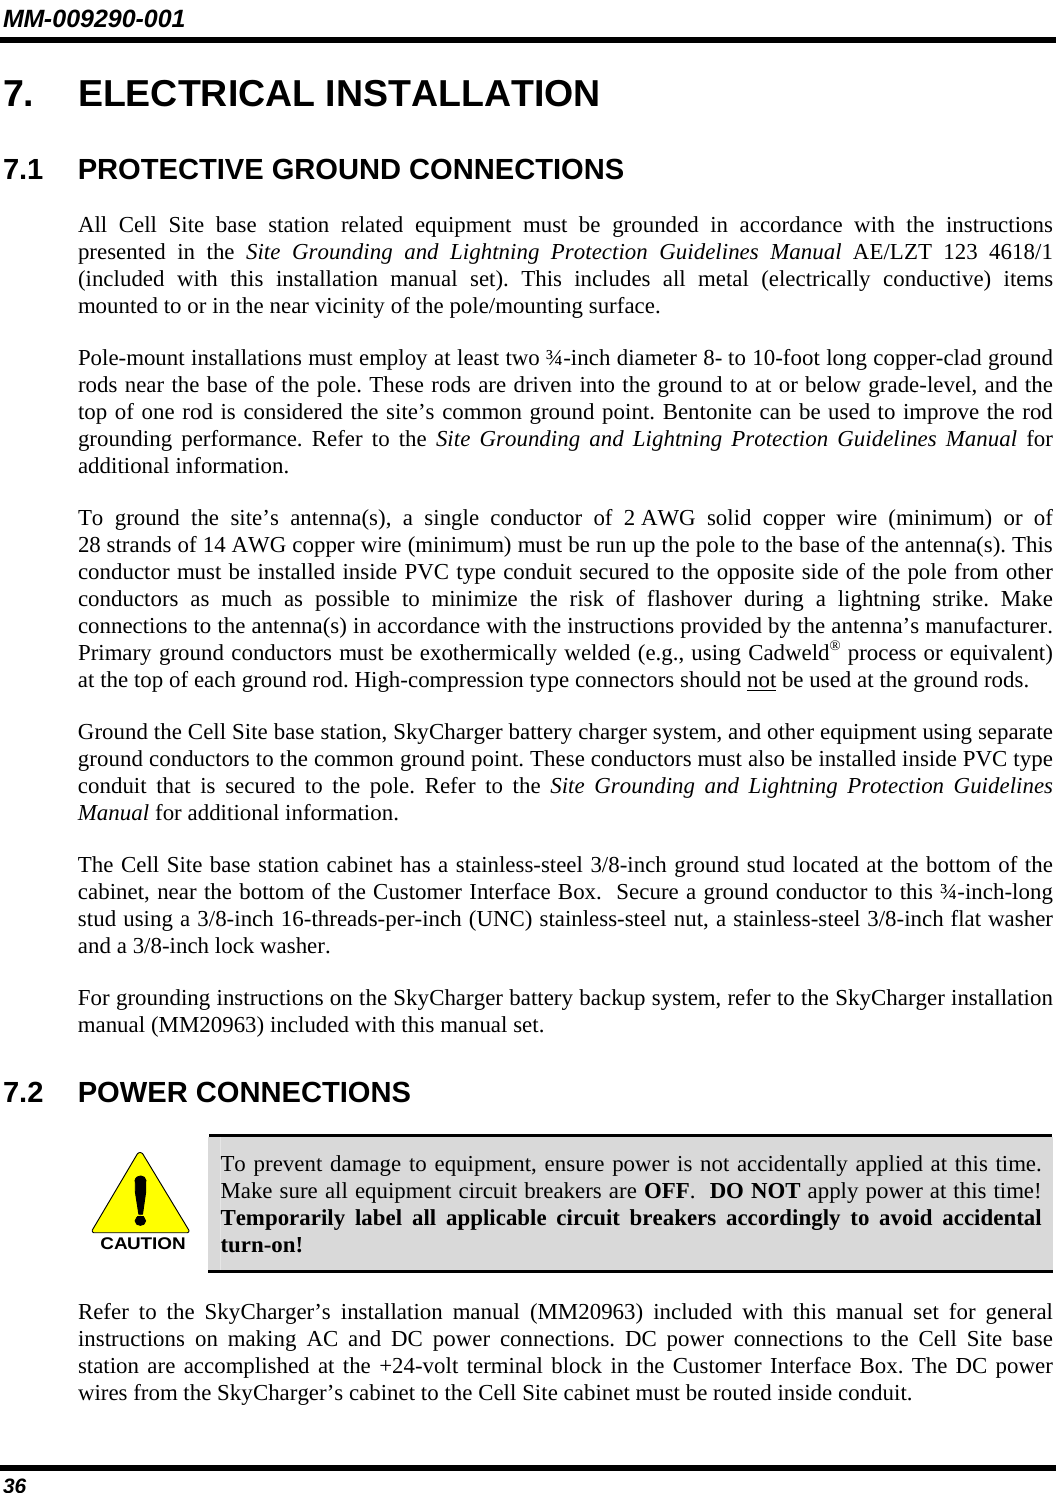 MM-009290-001 36   7. ELECTRICAL INSTALLATION 7.1  PROTECTIVE GROUND CONNECTIONS All Cell Site base station related equipment must be grounded in accordance with the instructions presented in the Site Grounding and Lightning Protection Guidelines Manual AE/LZT 123 4618/1 (included with this installation manual set). This includes all metal (electrically conductive) items mounted to or in the near vicinity of the pole/mounting surface. Pole-mount installations must employ at least two ¾-inch diameter 8- to 10-foot long copper-clad ground rods near the base of the pole. These rods are driven into the ground to at or below grade-level, and the top of one rod is considered the site’s common ground point. Bentonite can be used to improve the rod grounding performance. Refer to the Site Grounding and Lightning Protection Guidelines Manual for additional information. To ground the site’s antenna(s), a single conductor of 2 AWG solid copper wire (minimum) or of 28 strands of 14 AWG copper wire (minimum) must be run up the pole to the base of the antenna(s). This conductor must be installed inside PVC type conduit secured to the opposite side of the pole from other conductors as much as possible to minimize the risk of flashover during a lightning strike. Make connections to the antenna(s) in accordance with the instructions provided by the antenna’s manufacturer. Primary ground conductors must be exothermically welded (e.g., using Cadweld® process or equivalent) at the top of each ground rod. High-compression type connectors should not be used at the ground rods. Ground the Cell Site base station, SkyCharger battery charger system, and other equipment using separate ground conductors to the common ground point. These conductors must also be installed inside PVC type conduit that is secured to the pole. Refer to the Site Grounding and Lightning Protection Guidelines Manual for additional information. The Cell Site base station cabinet has a stainless-steel 3/8-inch ground stud located at the bottom of the cabinet, near the bottom of the Customer Interface Box.  Secure a ground conductor to this ¾-inch-long stud using a 3/8-inch 16-threads-per-inch (UNC) stainless-steel nut, a stainless-steel 3/8-inch flat washer and a 3/8-inch lock washer. For grounding instructions on the SkyCharger battery backup system, refer to the SkyCharger installation manual (MM20963) included with this manual set. 7.2 POWER CONNECTIONS  CAUTION To prevent damage to equipment, ensure power is not accidentally applied at this time. Make sure all equipment circuit breakers are OFF.  DO NOT apply power at this time! Temporarily label all applicable circuit breakers accordingly to avoid accidental turn-on! Refer to the SkyCharger’s installation manual (MM20963) included with this manual set for general instructions on making AC and DC power connections. DC power connections to the Cell Site base station are accomplished at the +24-volt terminal block in the Customer Interface Box. The DC power wires from the SkyCharger’s cabinet to the Cell Site cabinet must be routed inside conduit. 